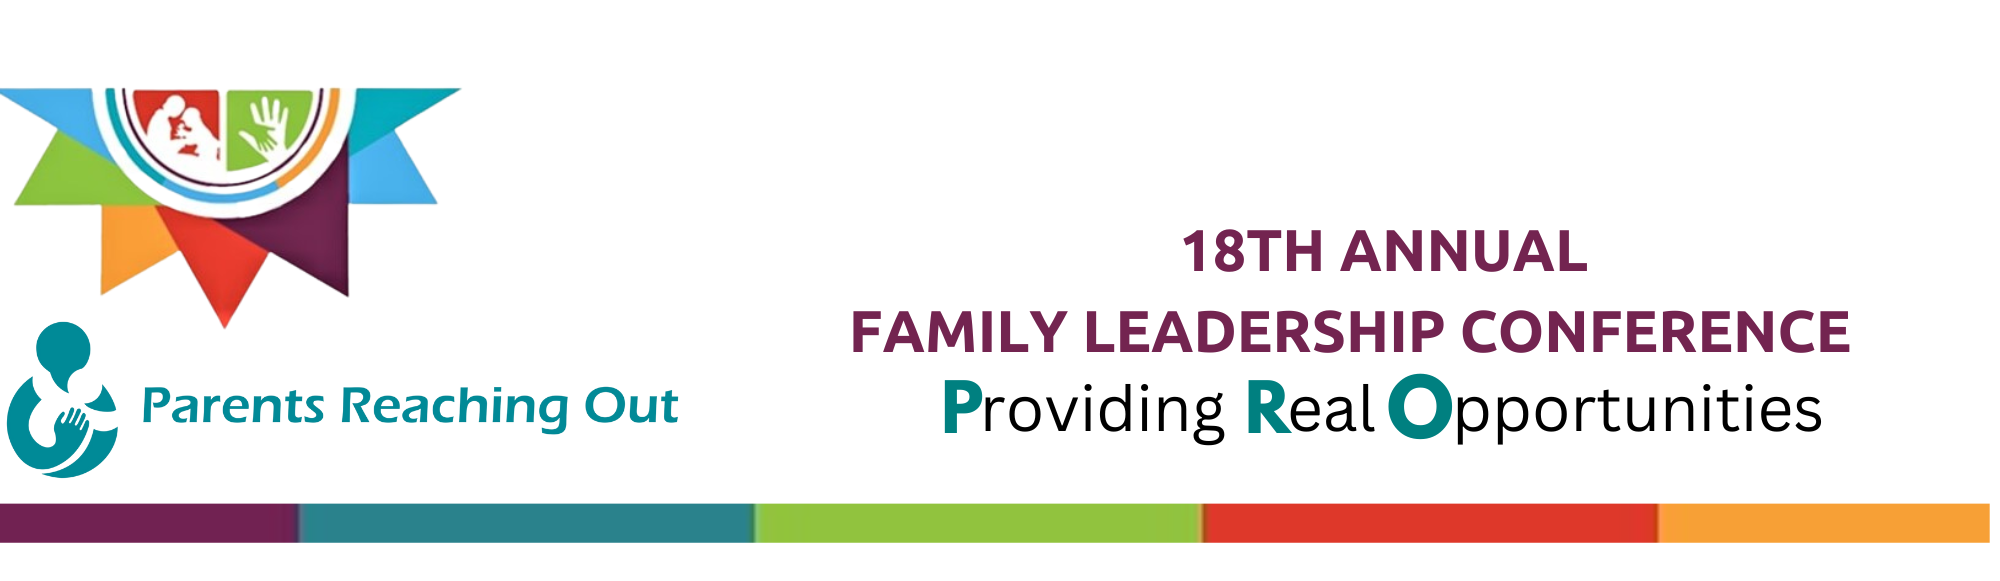 Family Leadership Conference